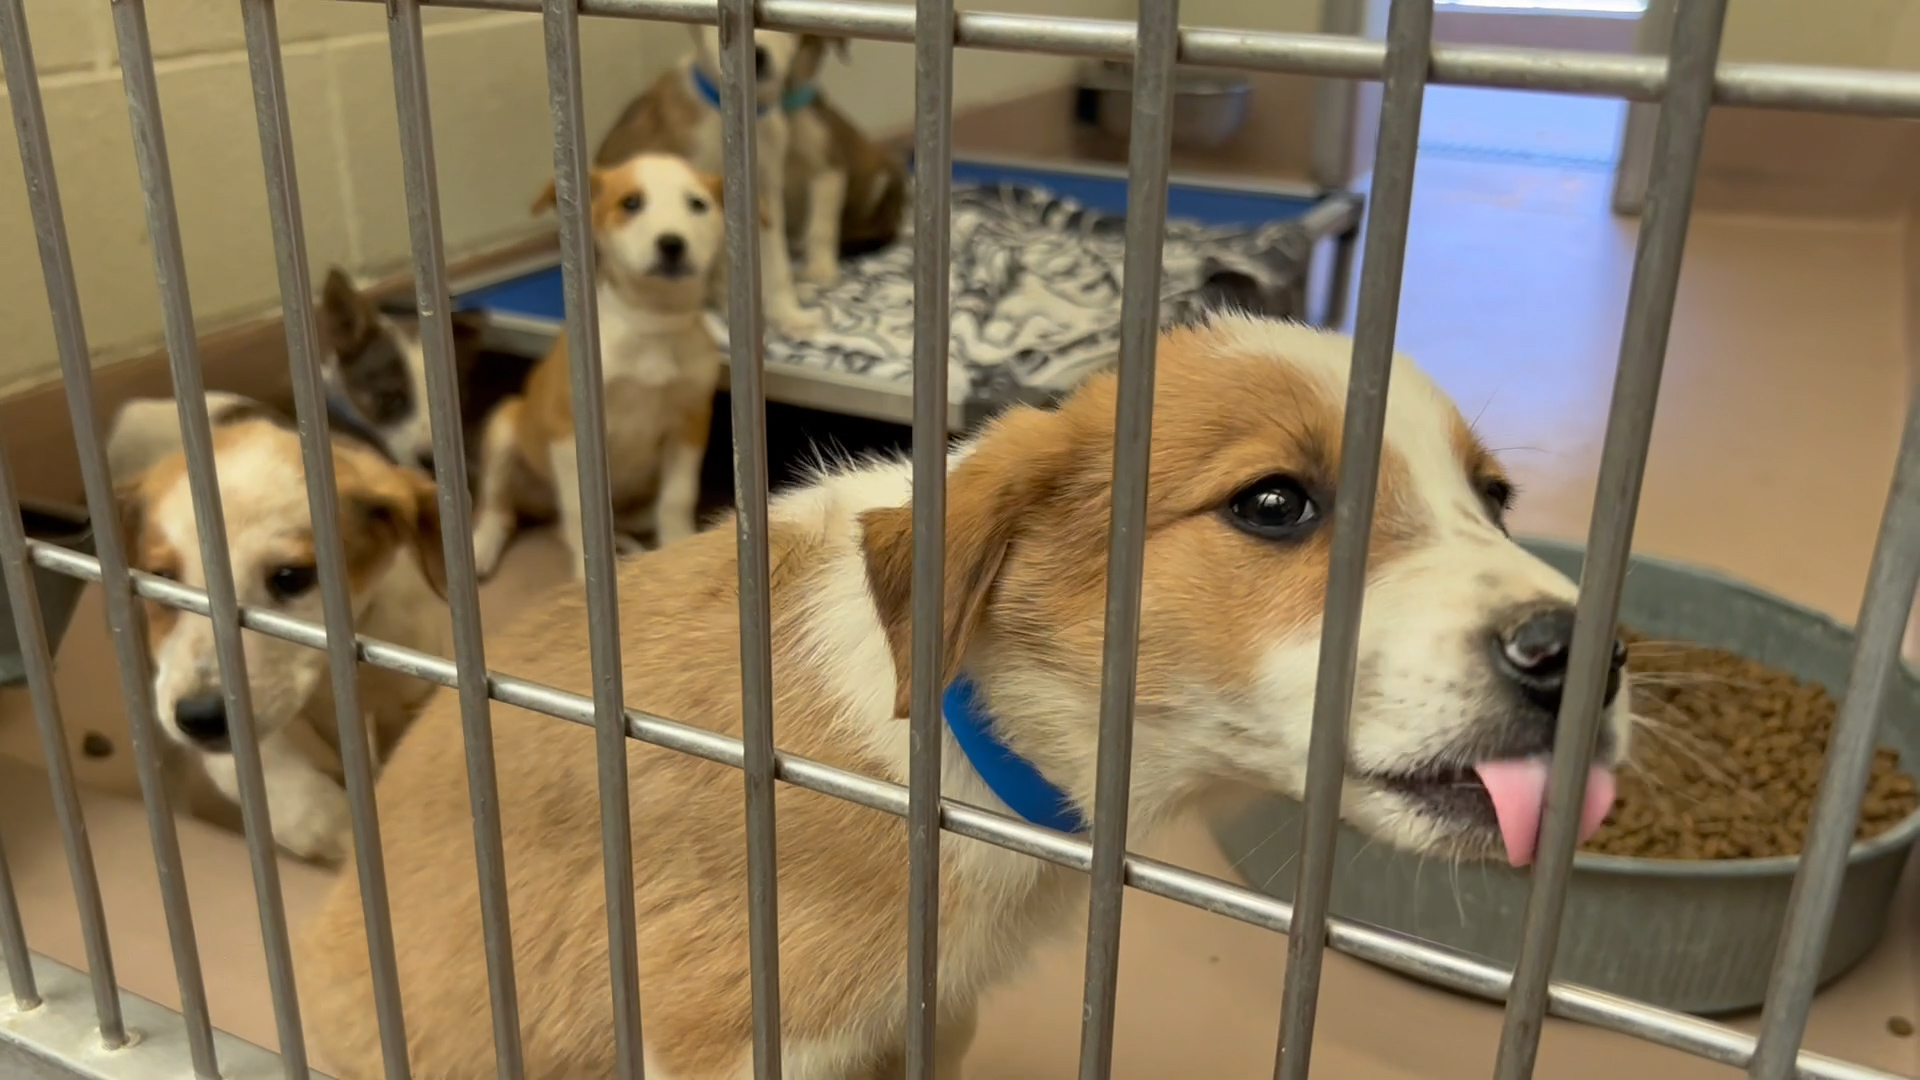 RivCo Animal Shelter Over Capacity, Expected to Double After July 4th